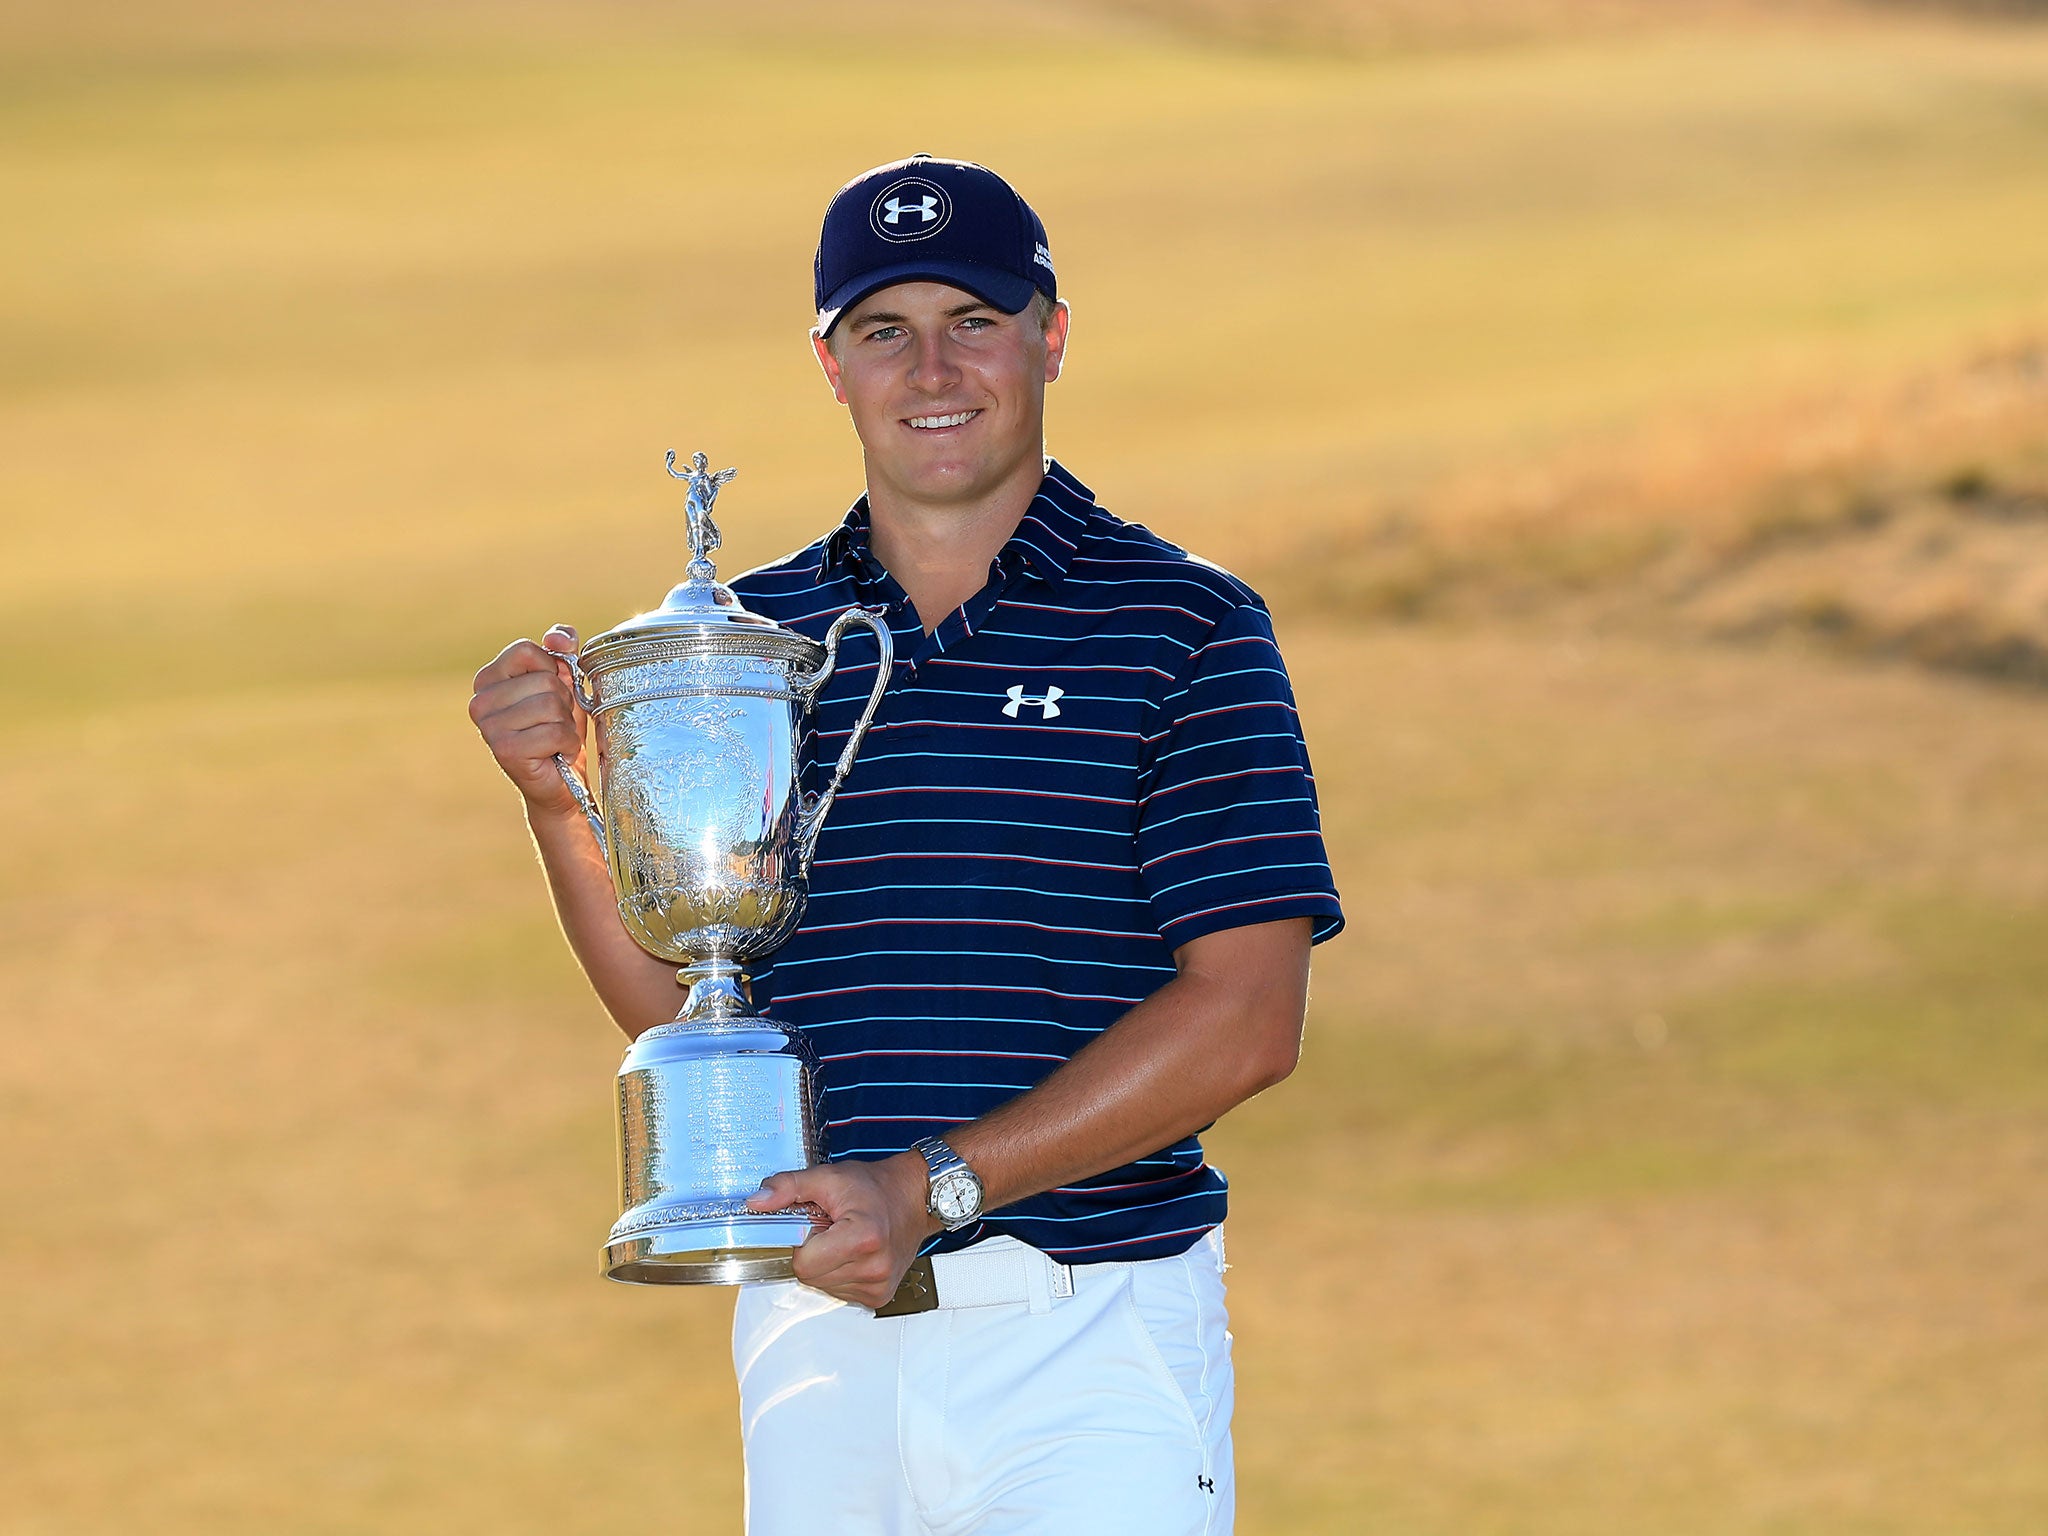 Jordan Spieth has won the 115th US Open at Chambers Bay